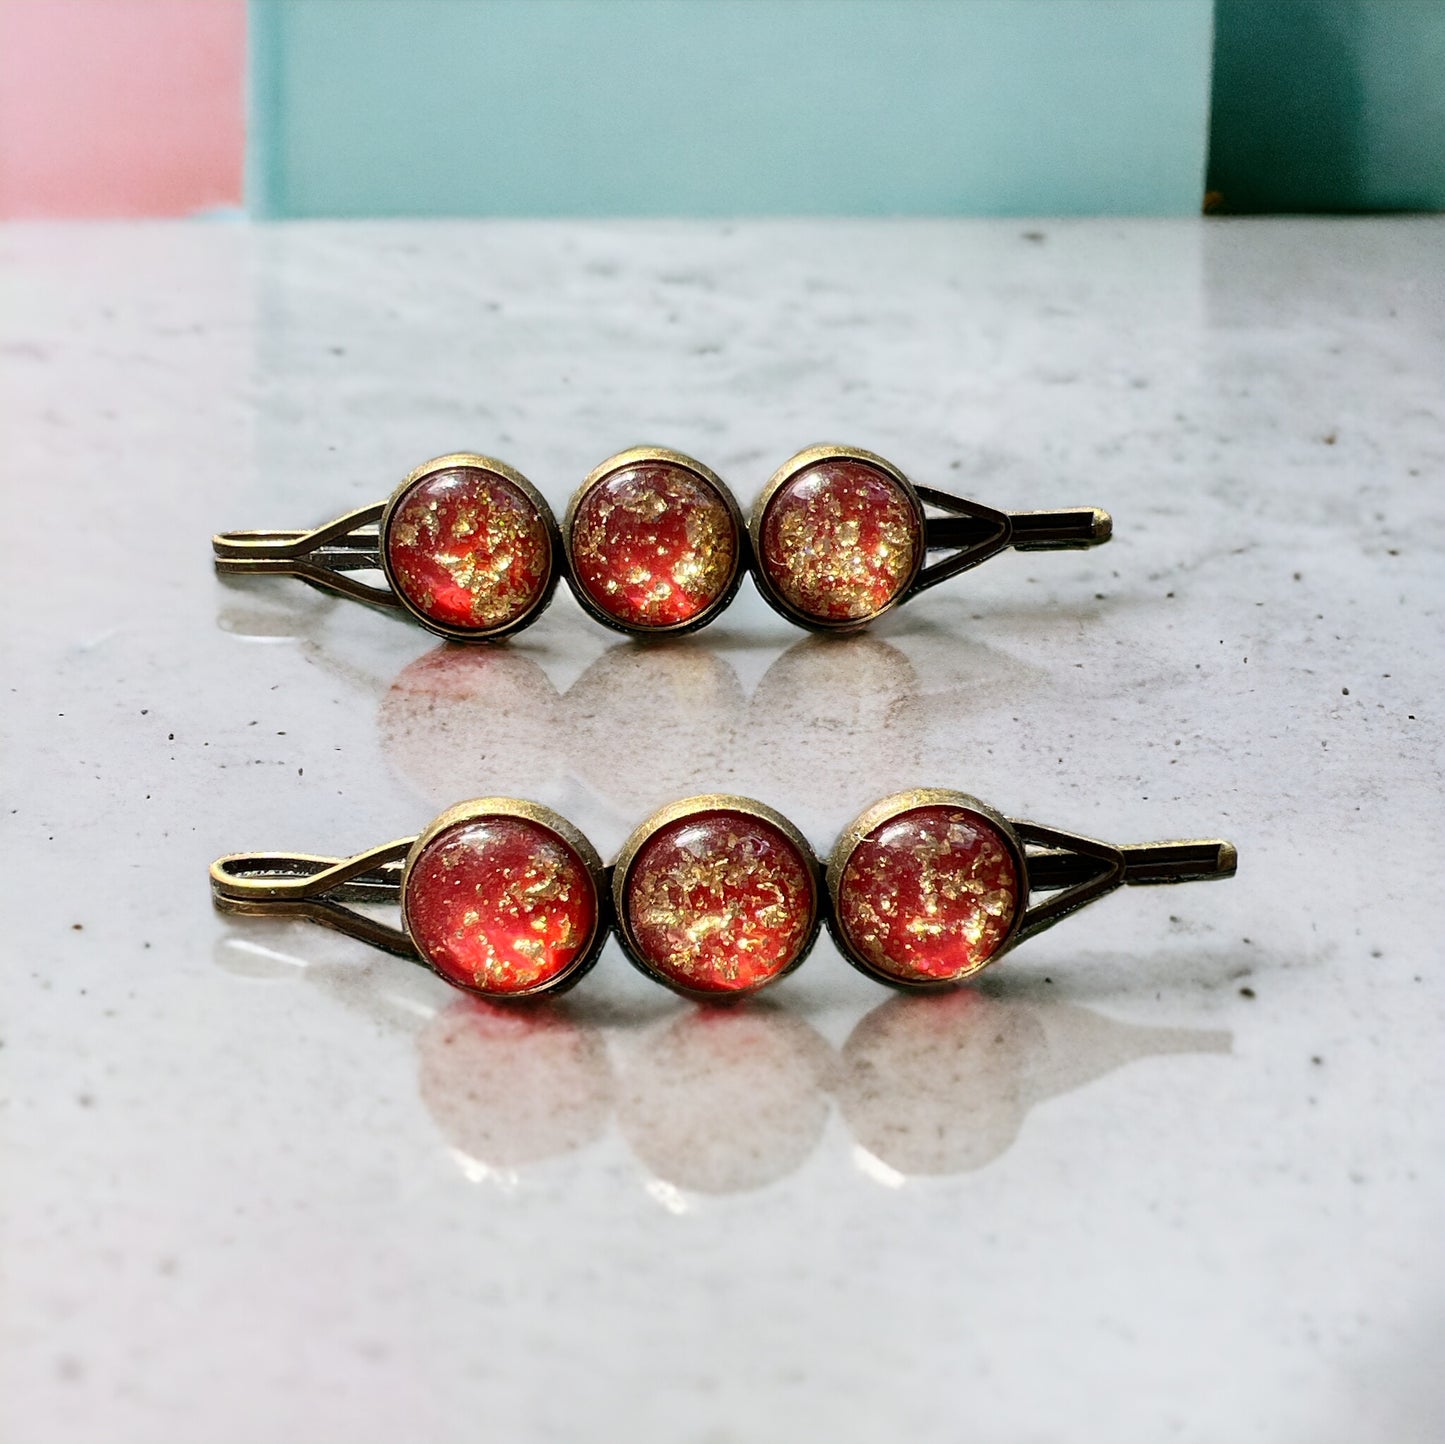 Red Gold Flake Glitter Hair Pins: Sparkling Accents for Glamorous Hairstyles